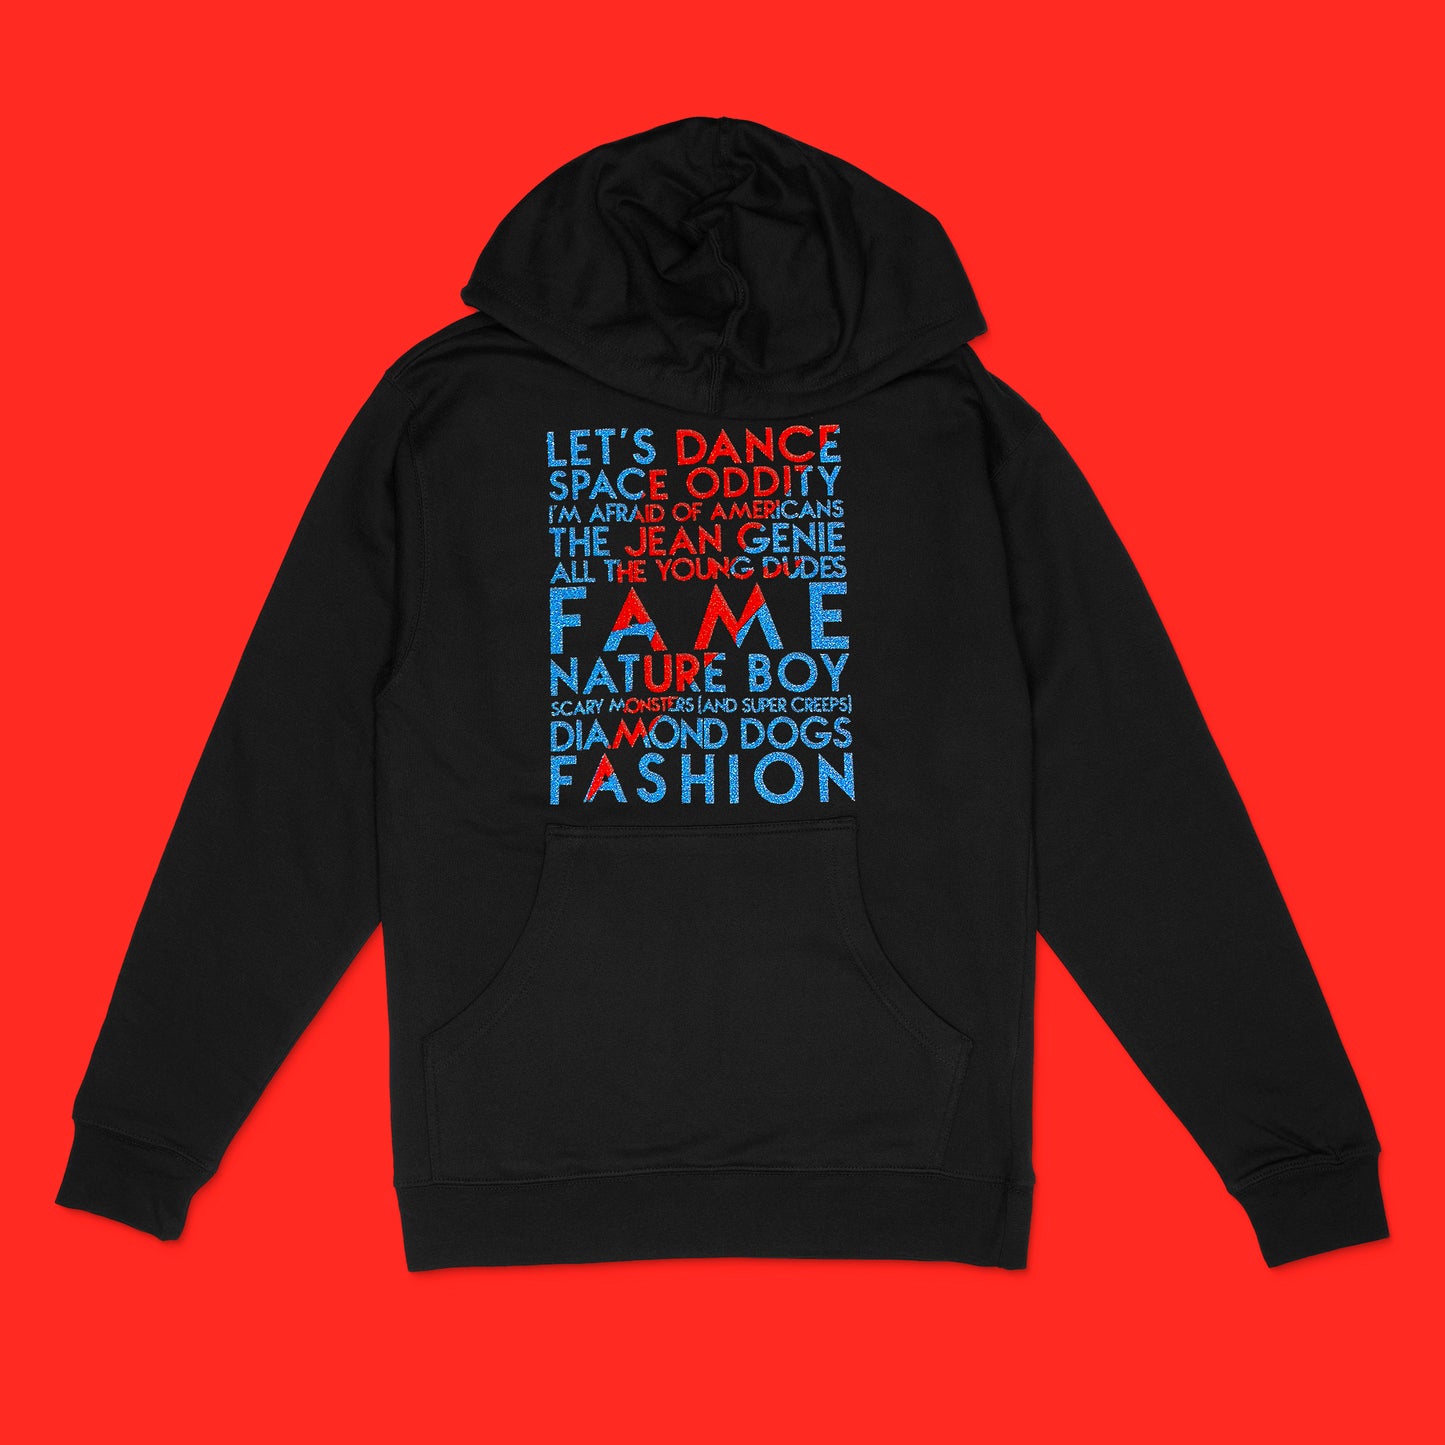 David Bowie song titles with lightning bolt icon in red and blue glitter text on black unisex hooded sweathshirt - Customizable YourTen David Bowie Icon hooded sweatshirt by BBJ / Glitter Garage